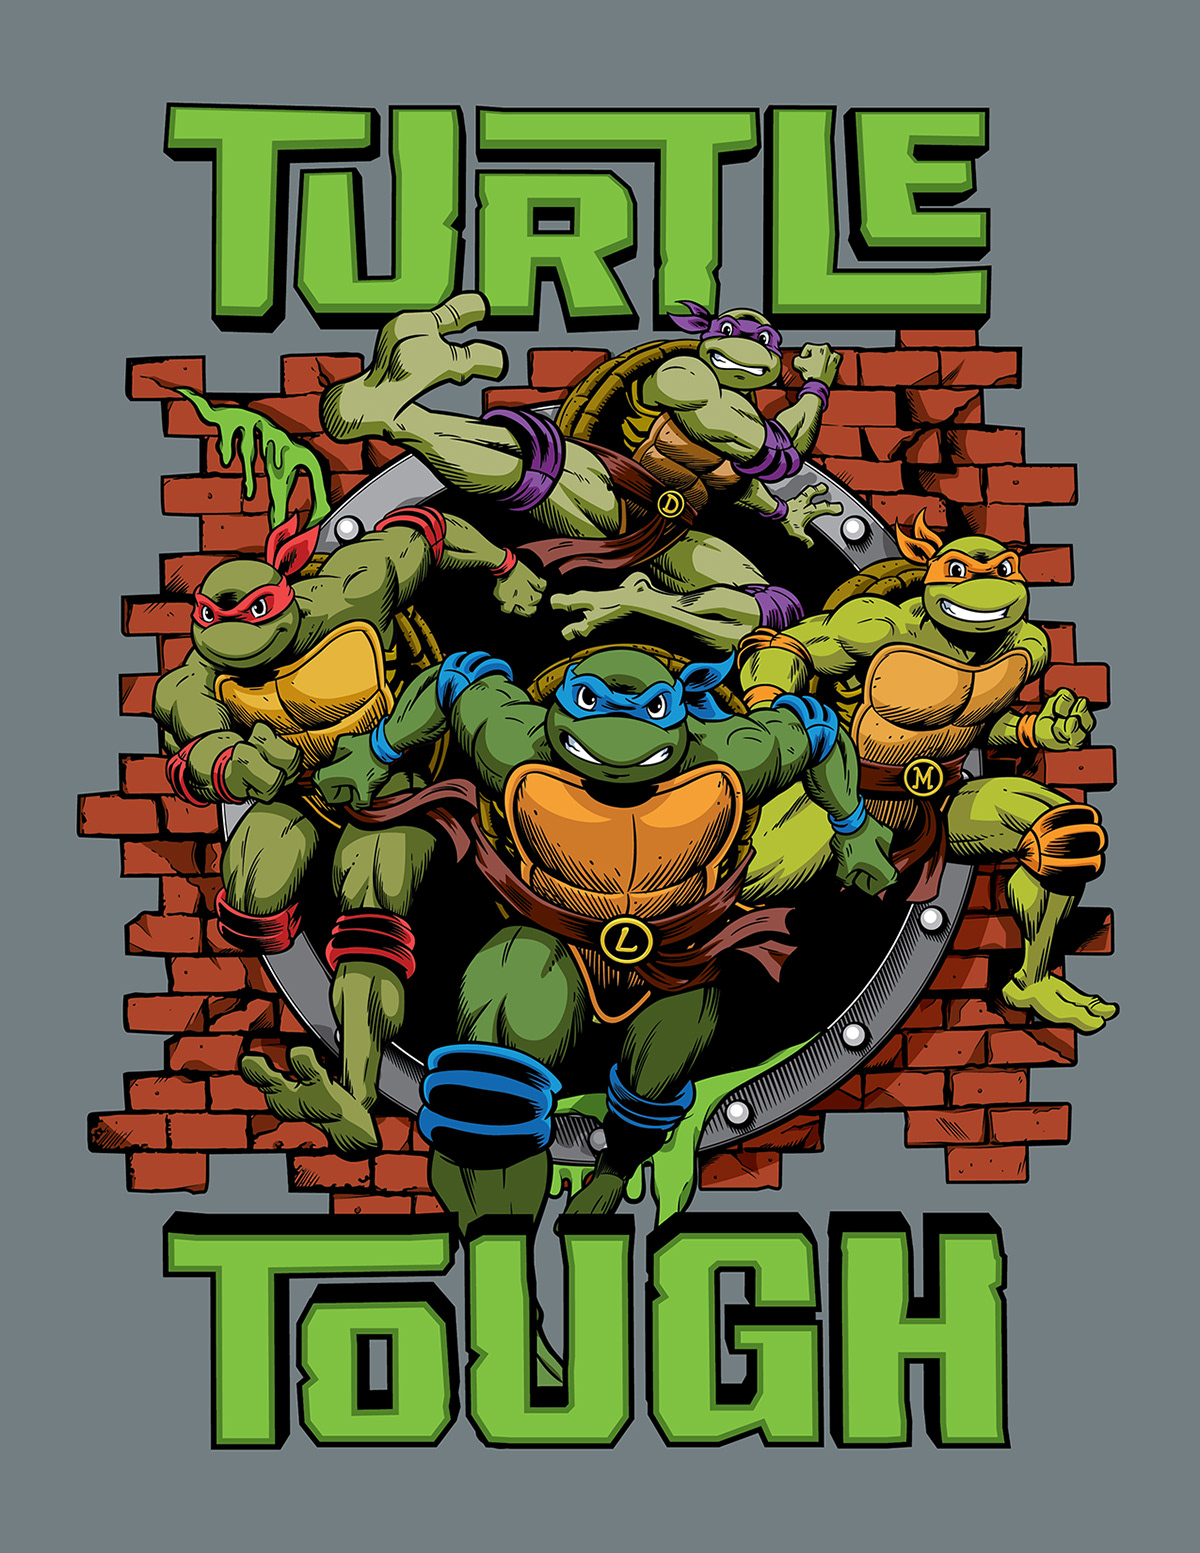 Consumer Products evergreen licensing nickelodeon Style Guide TMNT visual identity